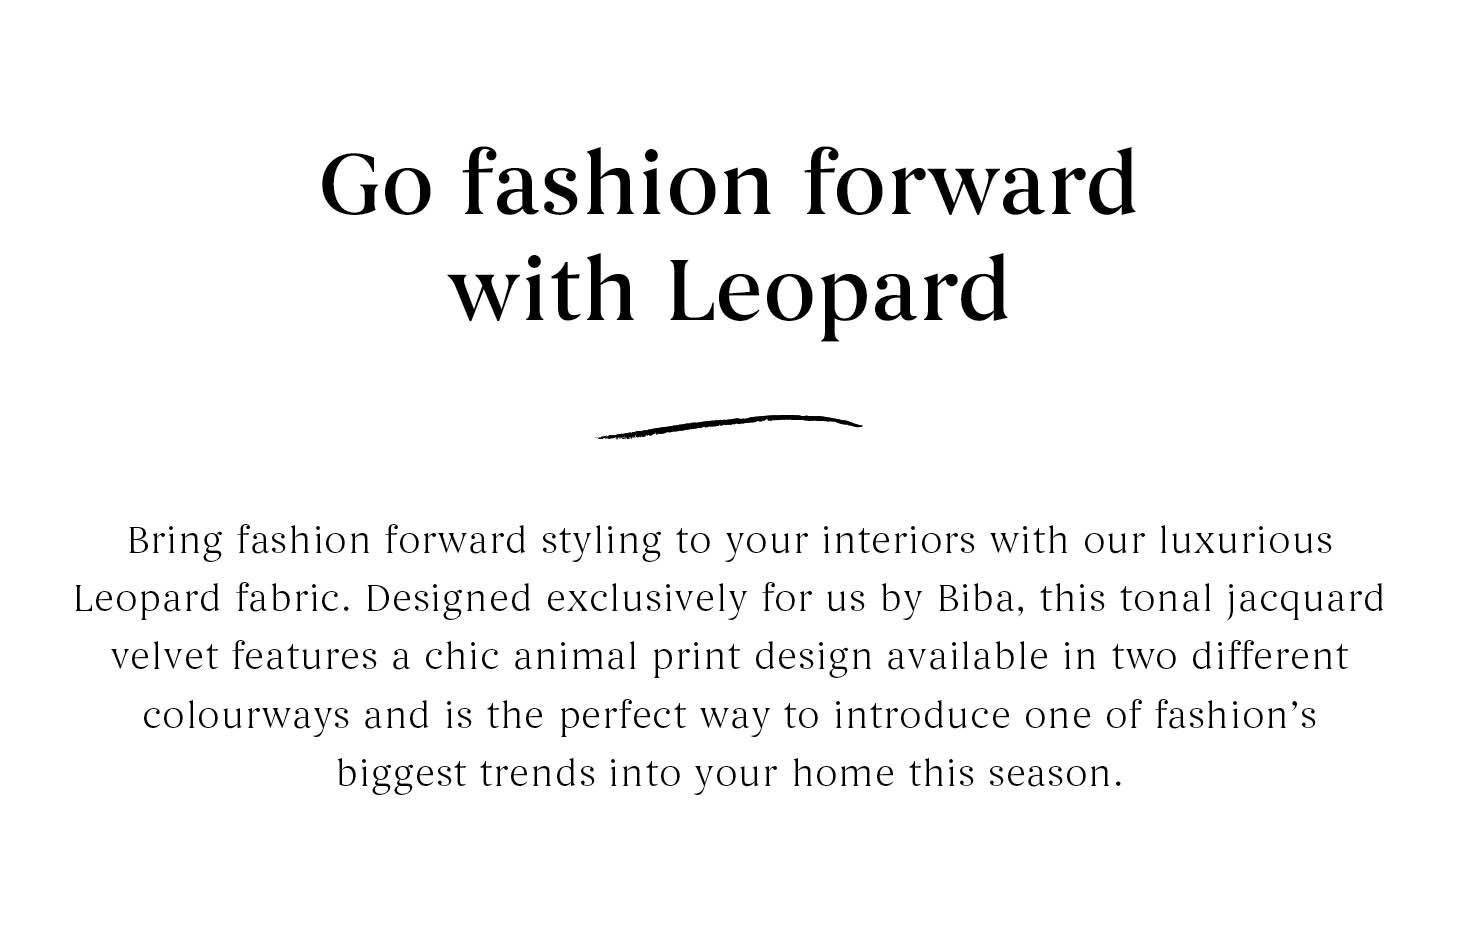 Go fashion forward with Leopard - Bring fashion forward styling to your interiors with our luxurious Leopard fabric. Designed exclusively for us by Biba, this tonal jacquard velvet featured a chic aimal print design available in two different colourways.